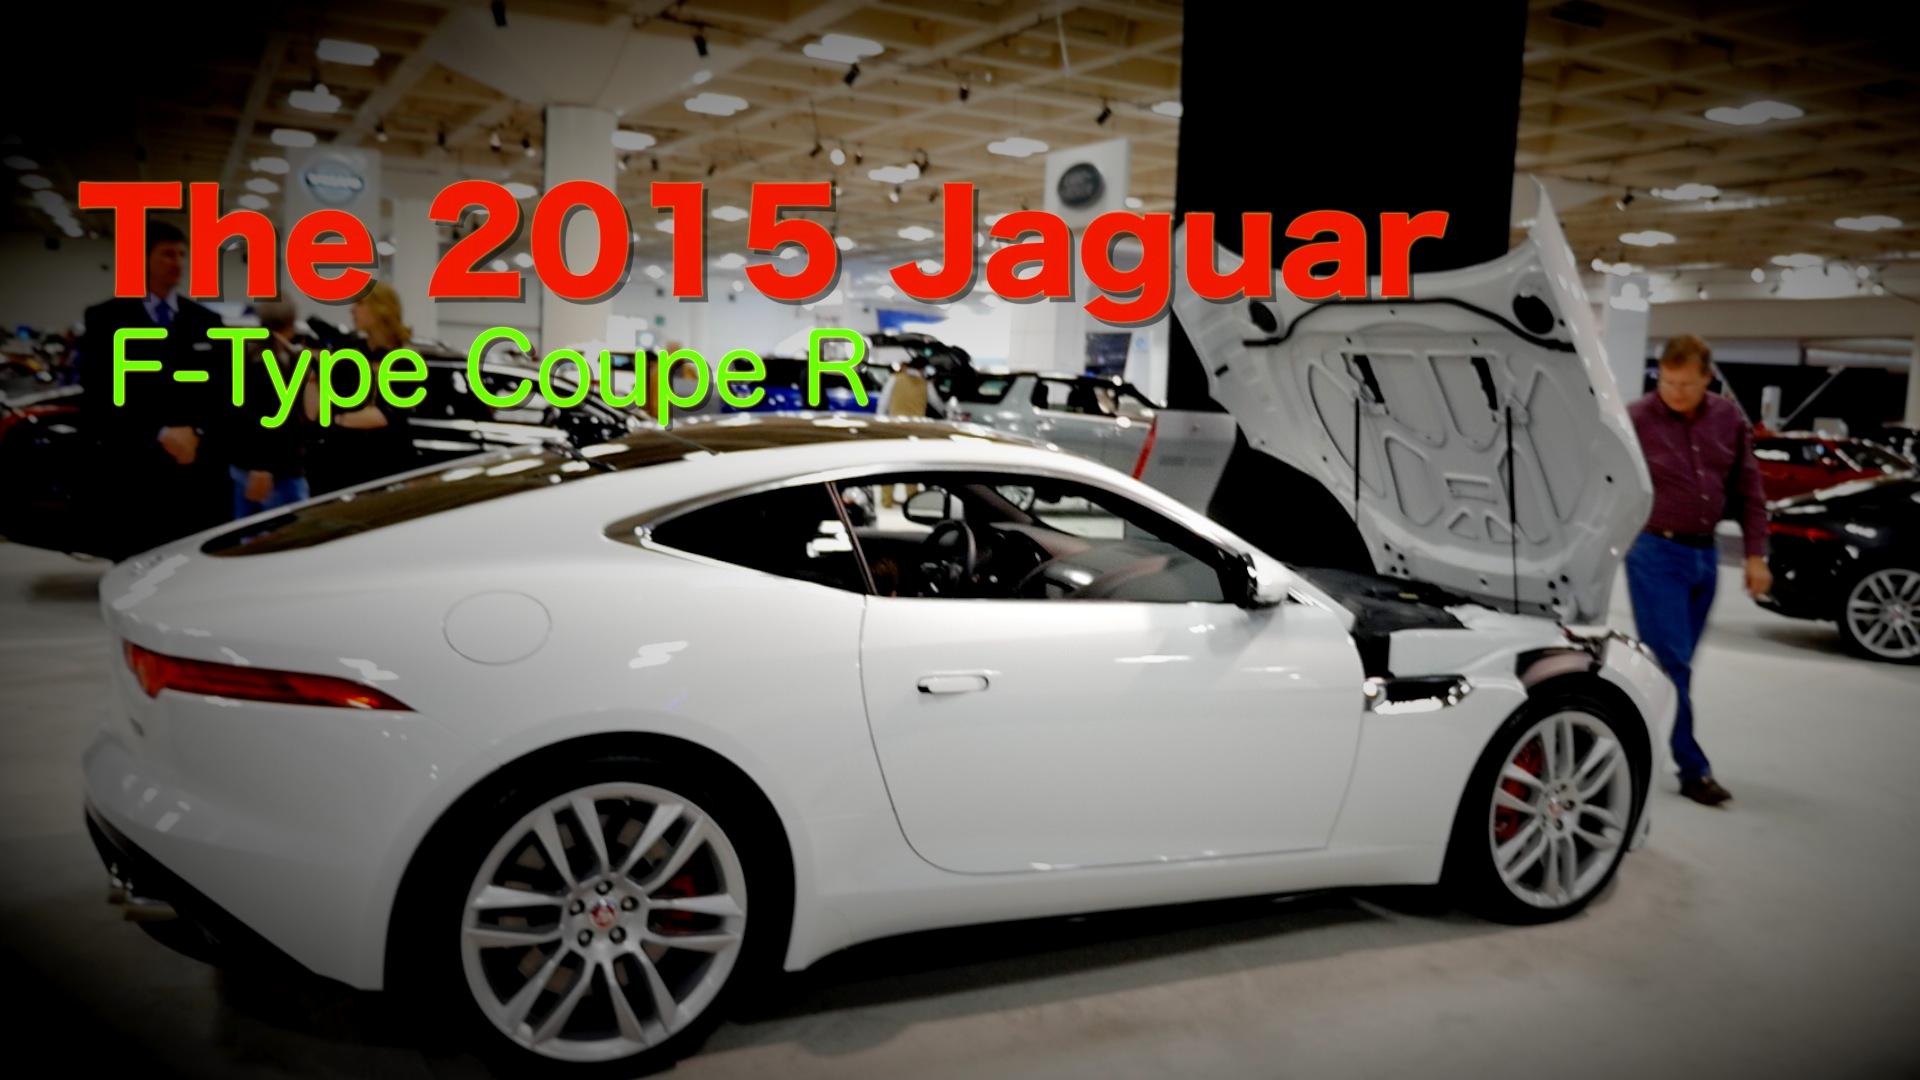 The 2015 Jaguar F-Type Coupe R: A Modern Take On A Classic